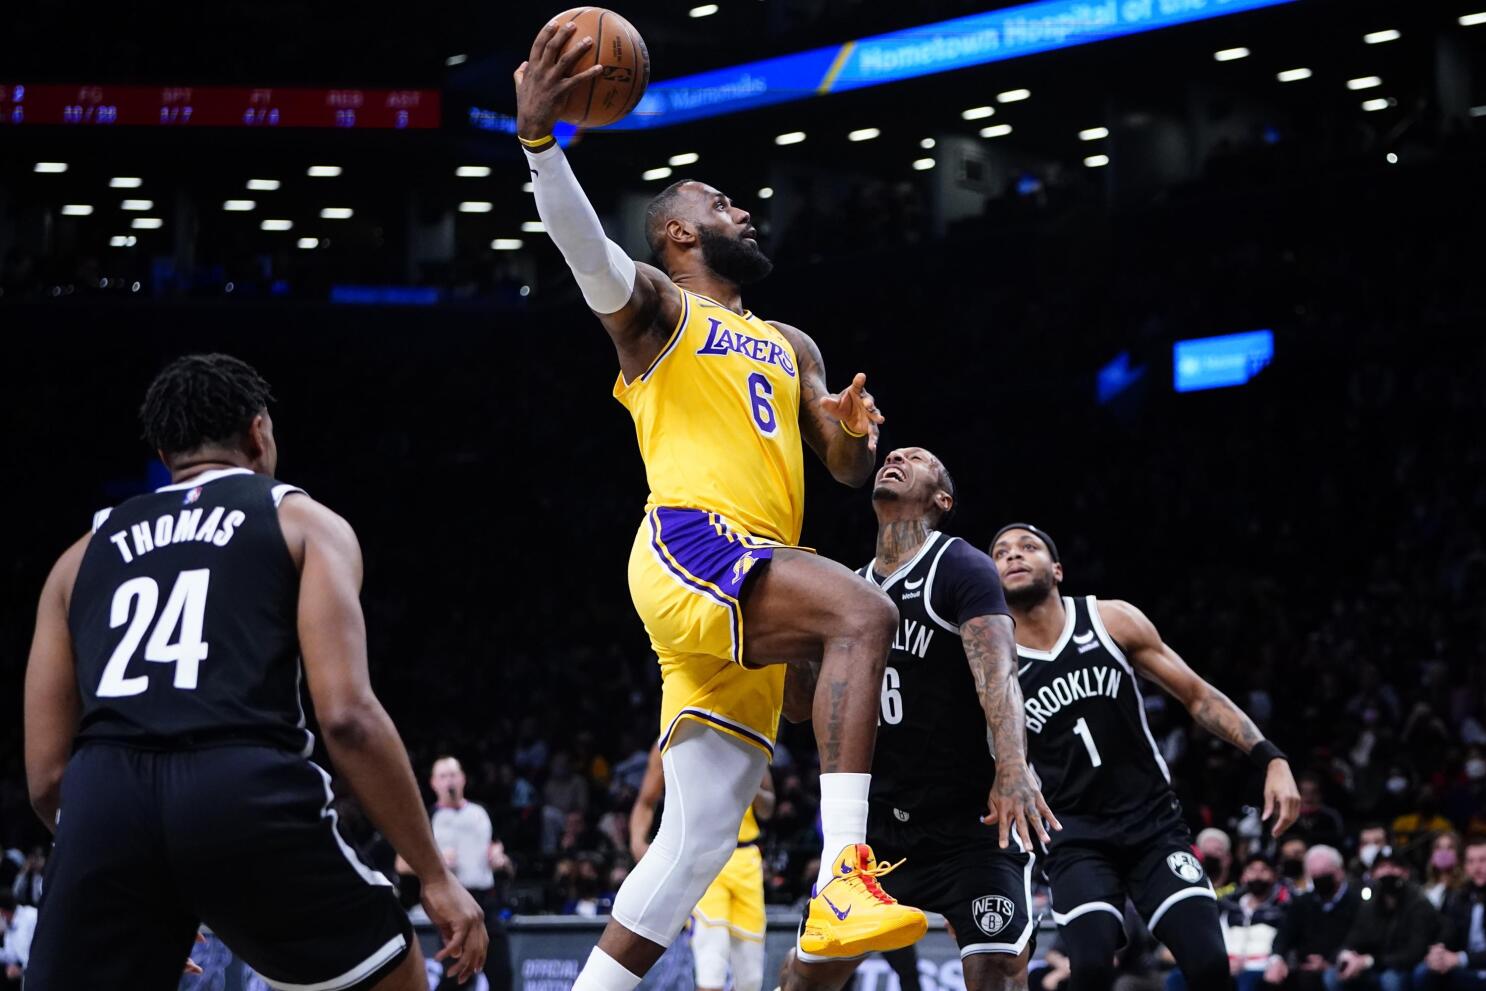 Lakers vs. Nets: Play-by-play, highlights and reactions